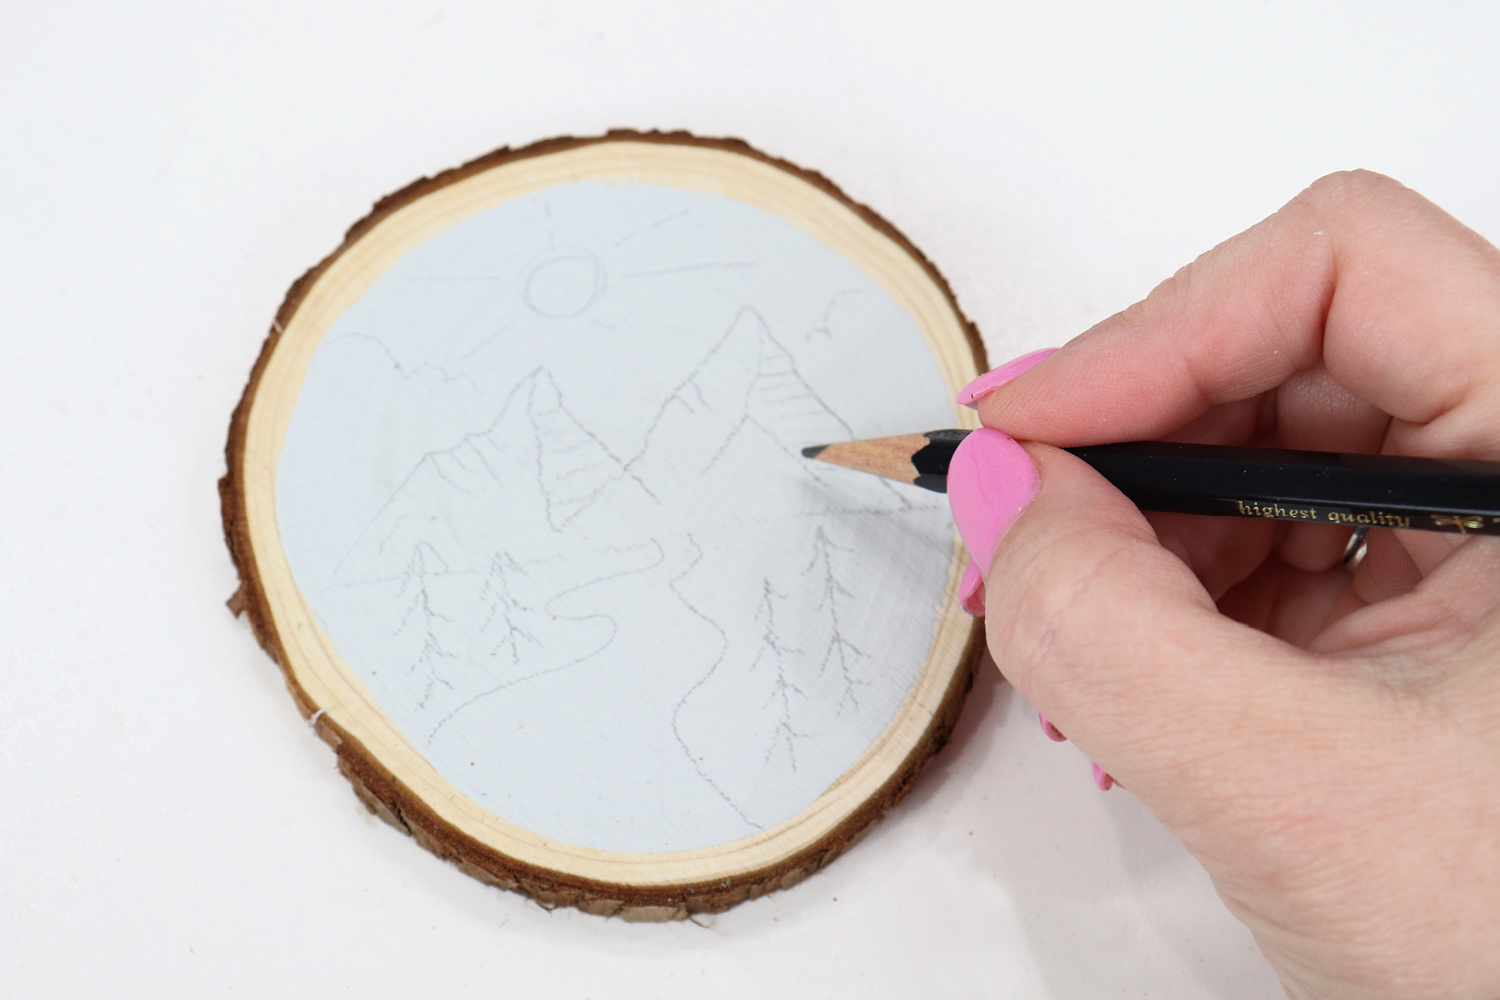 Image contains Amy’s hand holding a Tombow drawing pencil and sketching a scene on a painted wood slice.